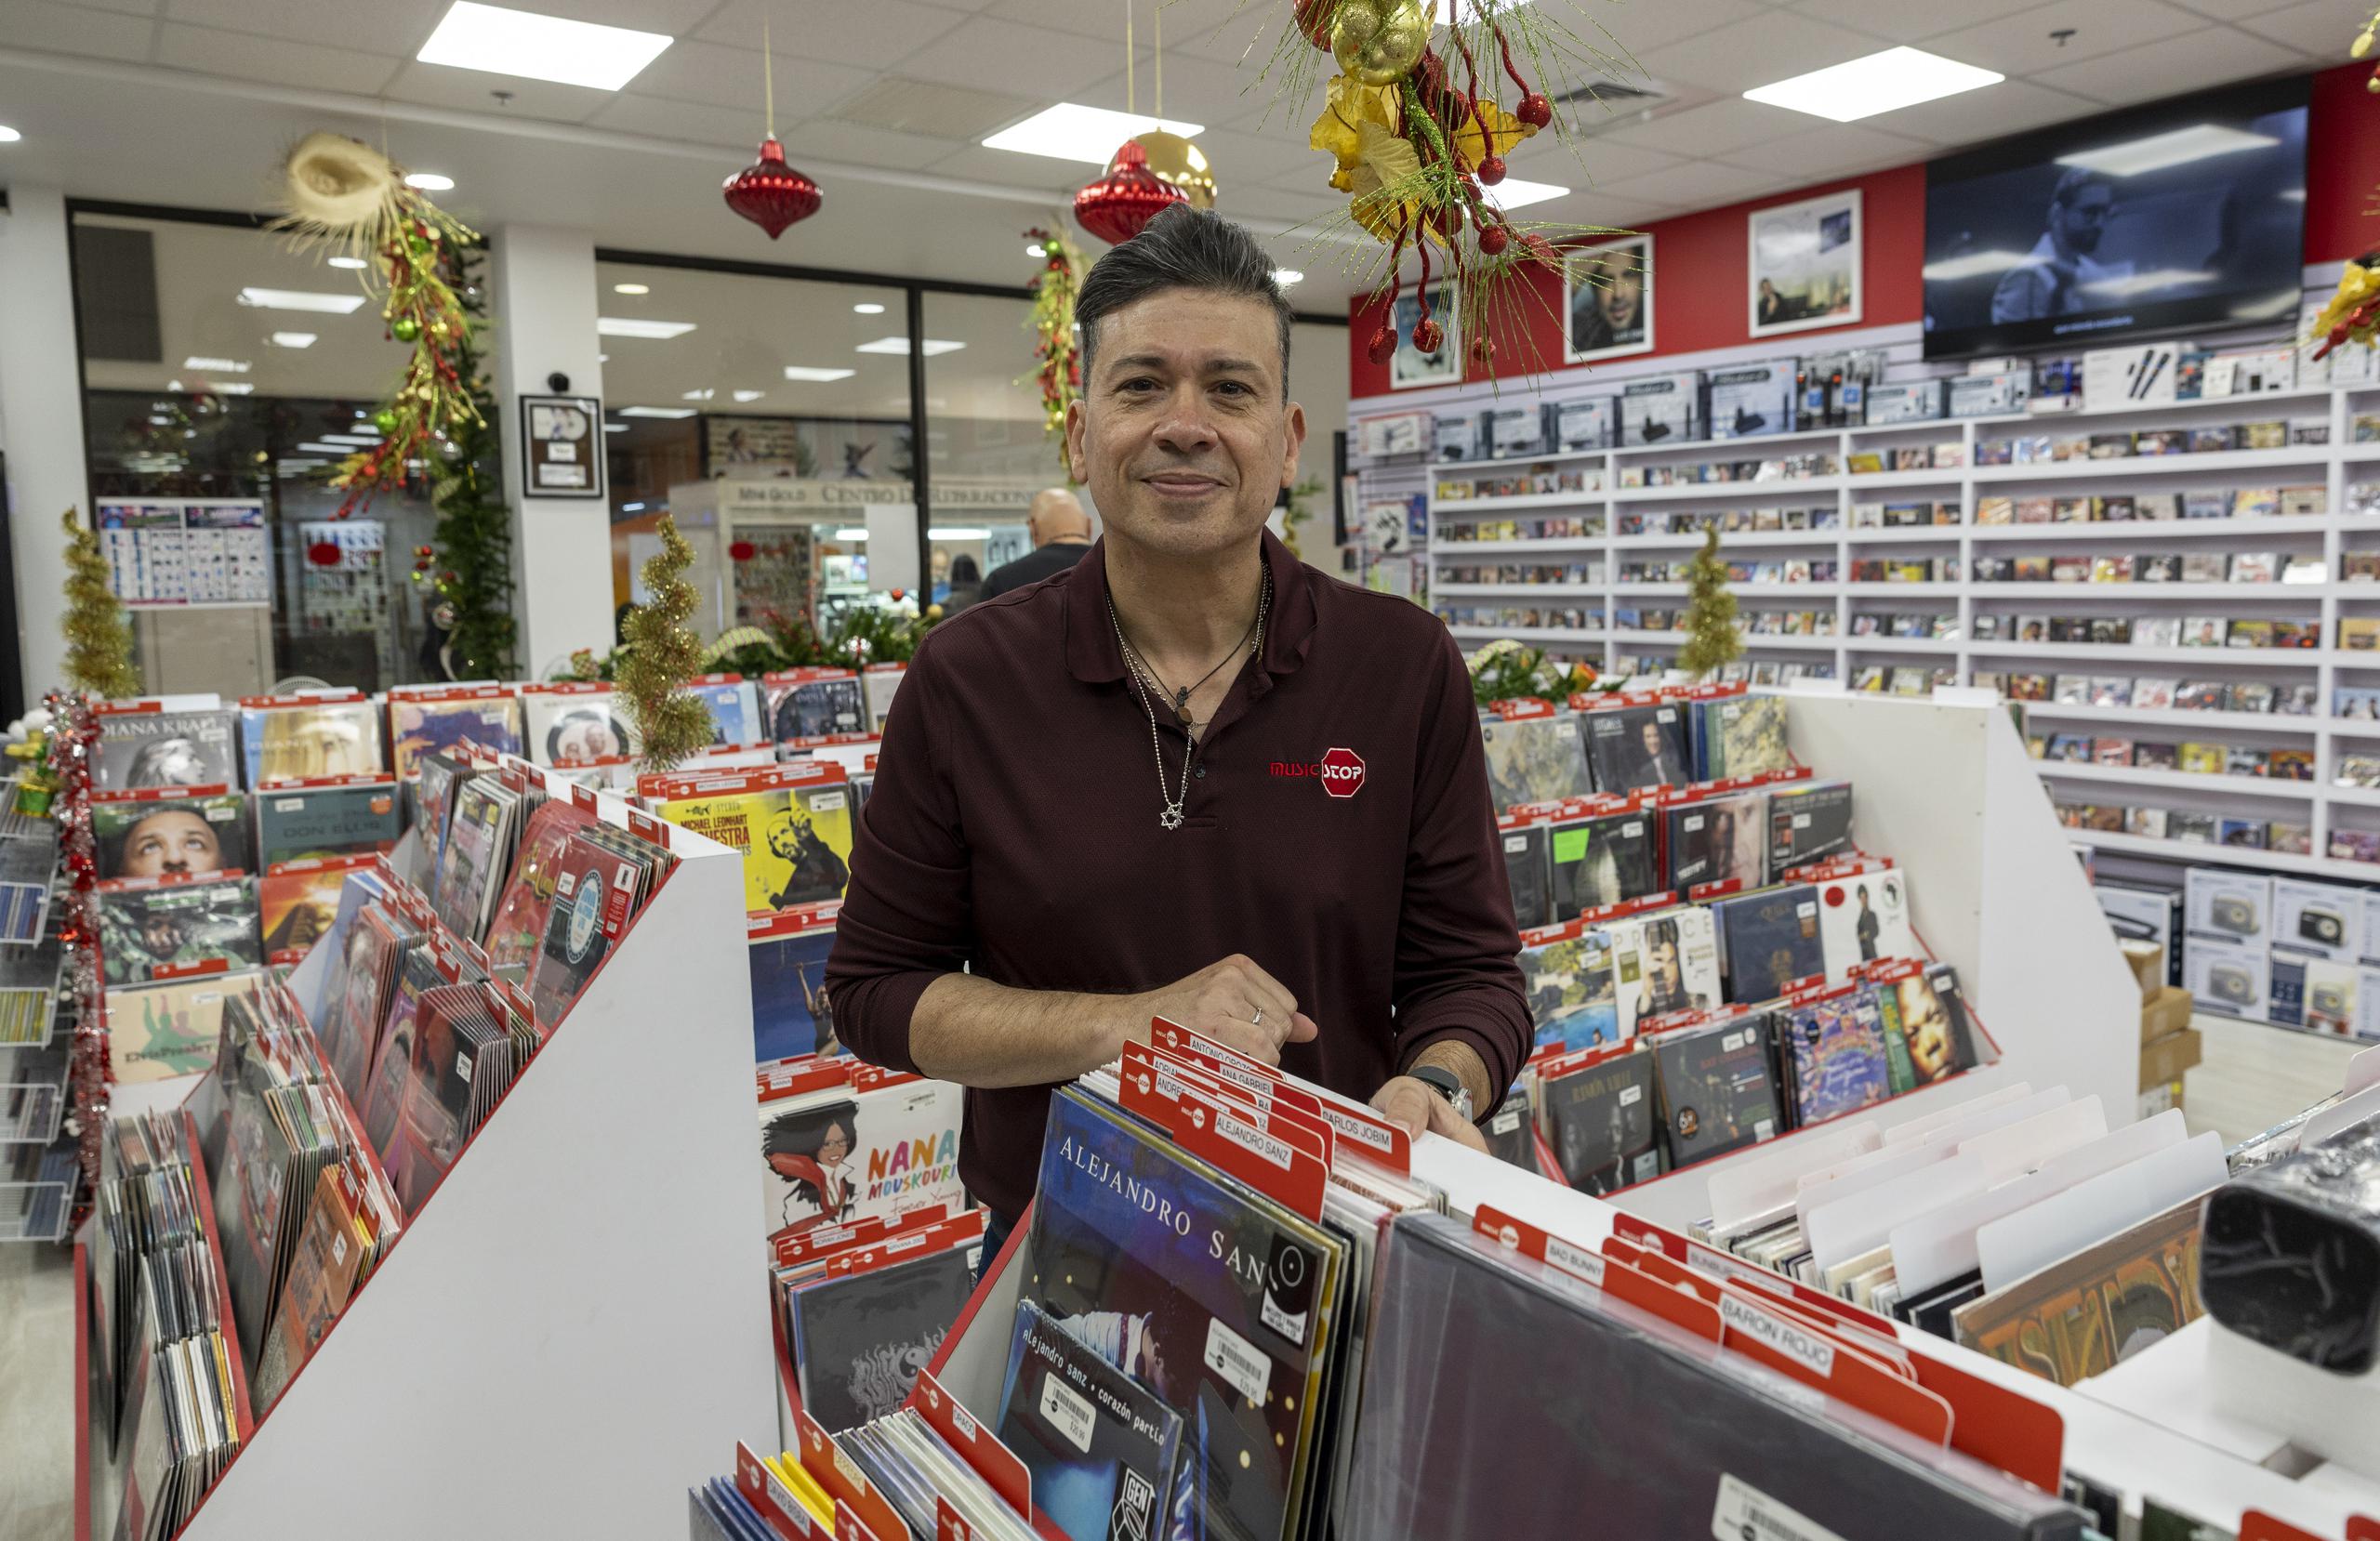 Richard Soto, who took the reins of Music Stop in 2005, continues to offer records and electronics to the public in Puerto Rico and the United States.